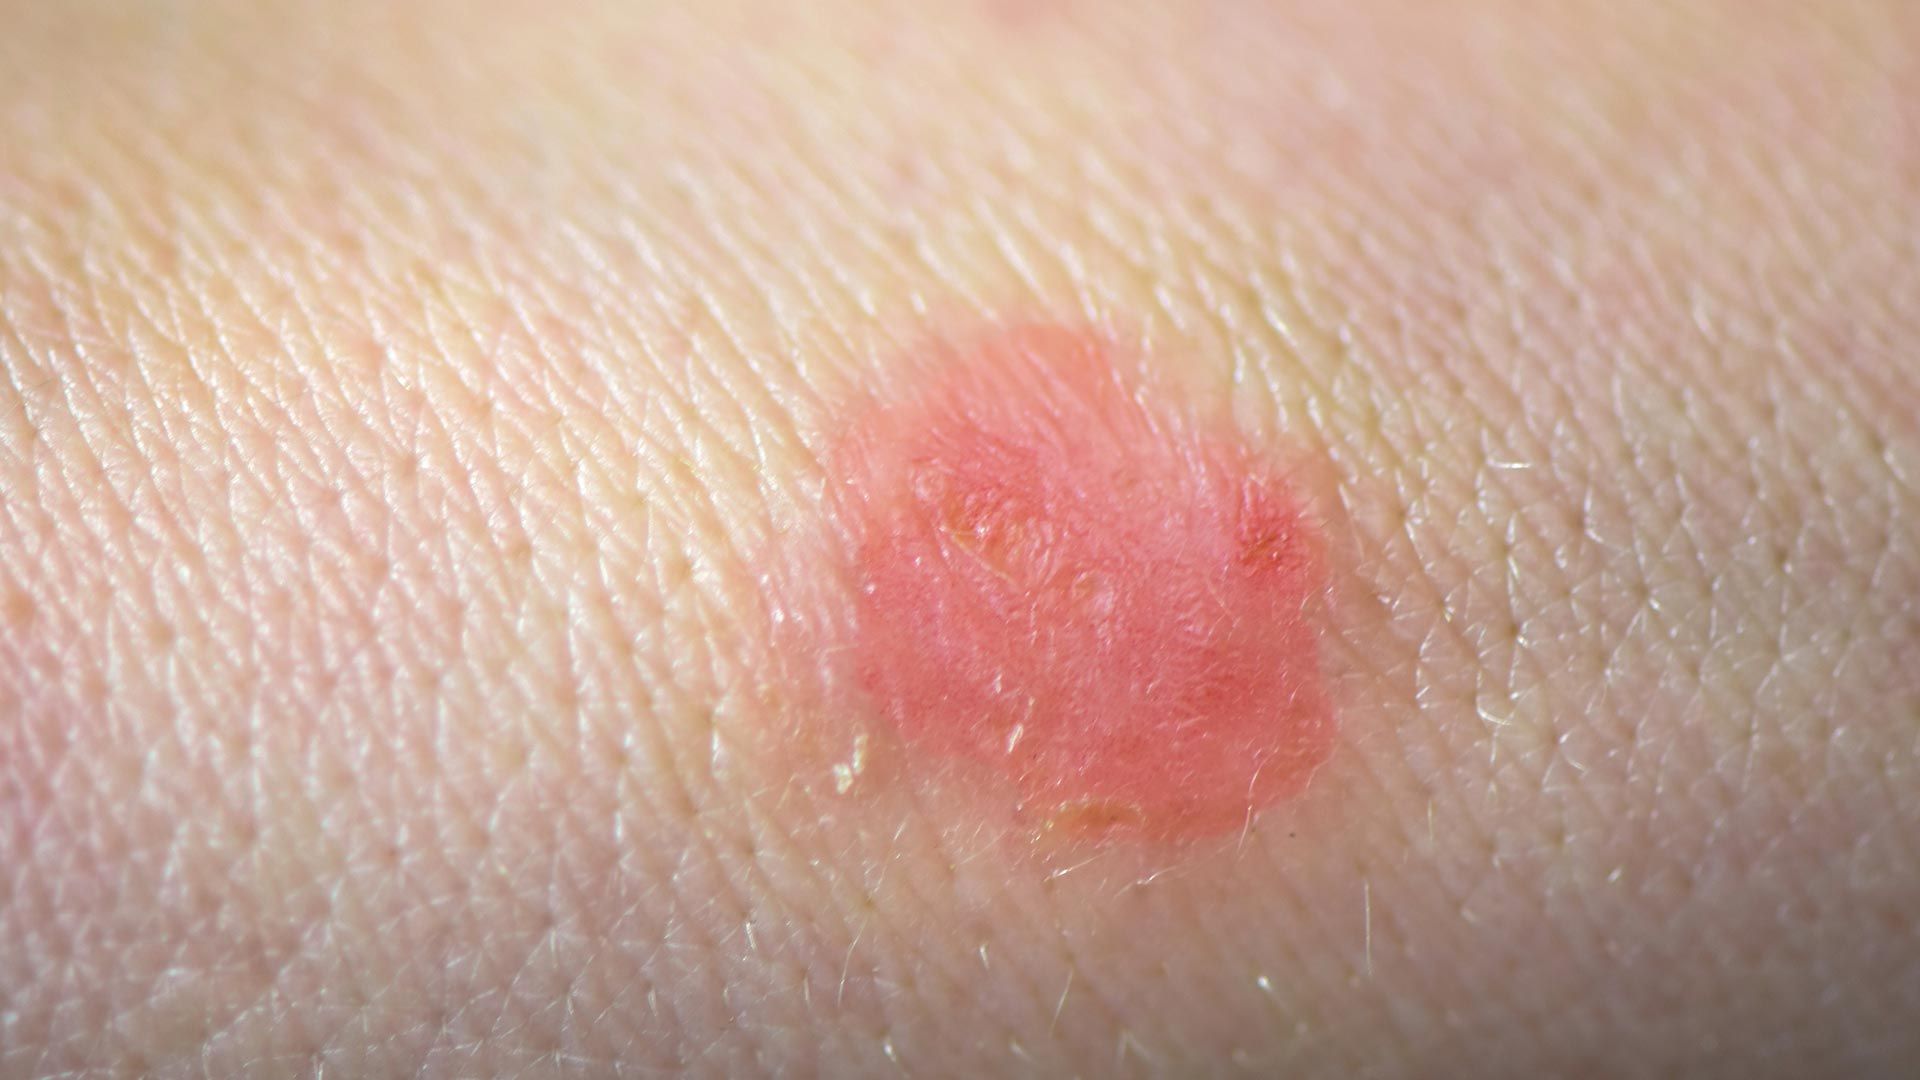 Skin-Conditions-You-Should-Know-About-01-Ringworm-1440x810